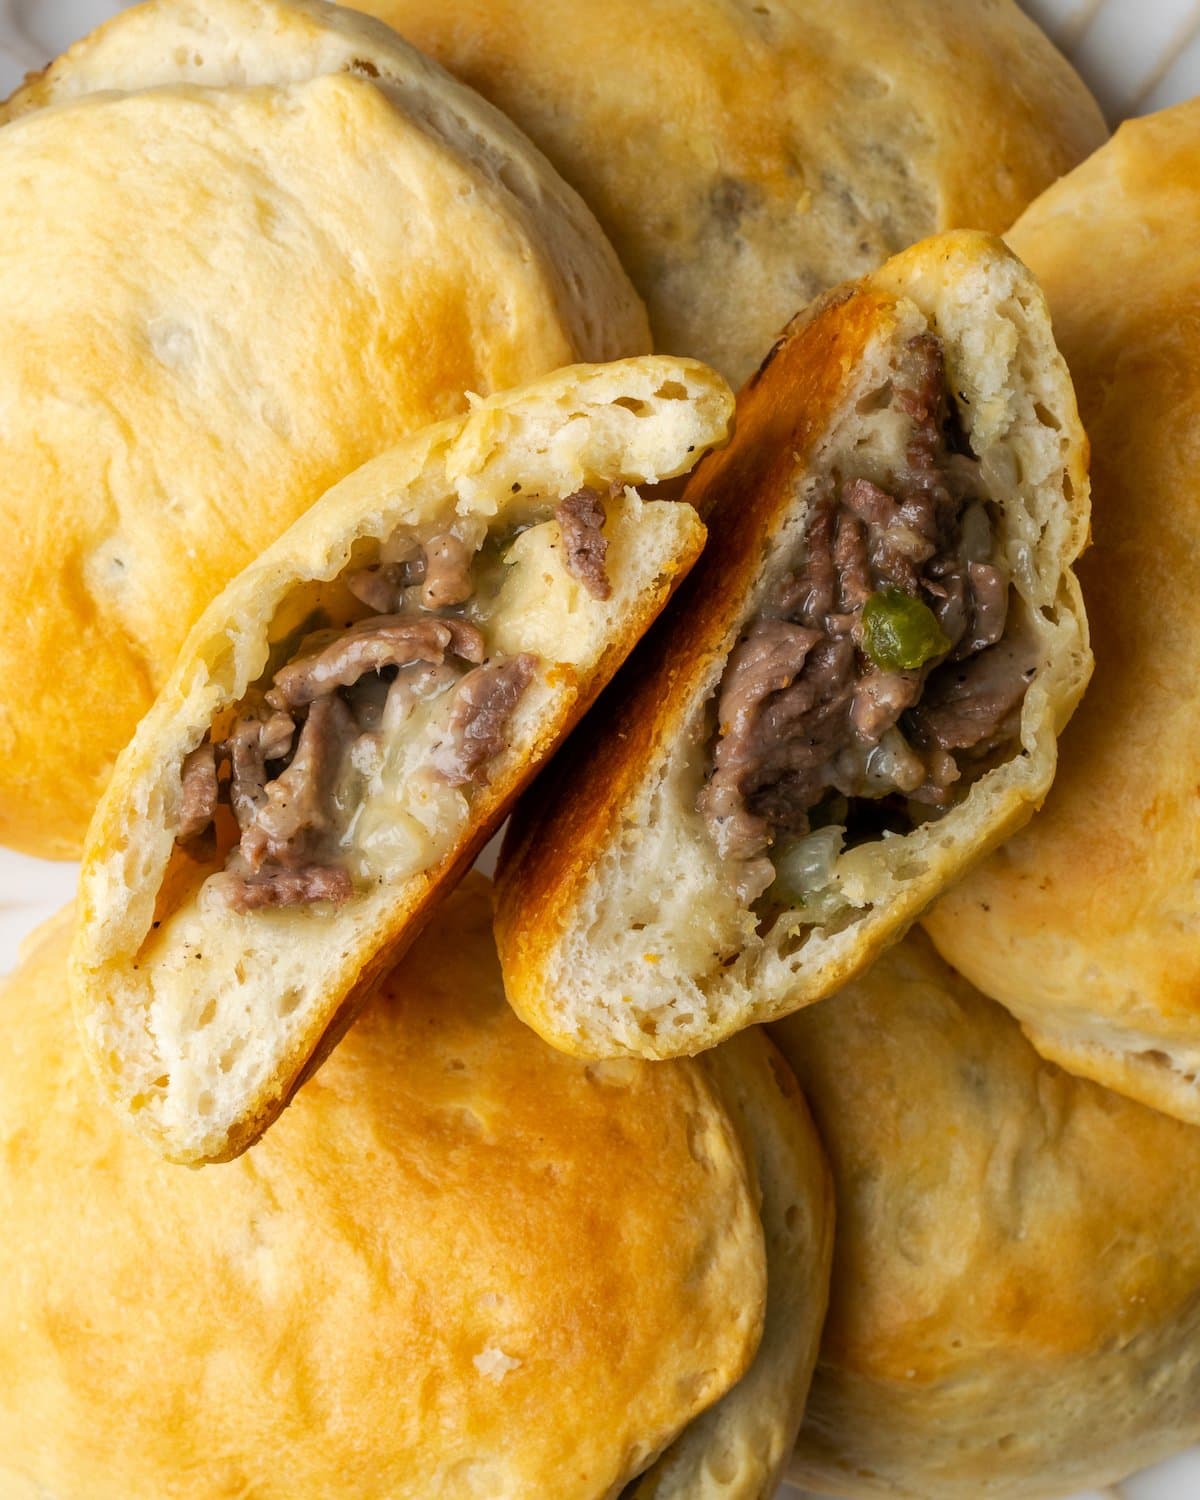 A Philly cheesesteak stuffed biscuit cut in half, surrounded by more stuffed biscuits.